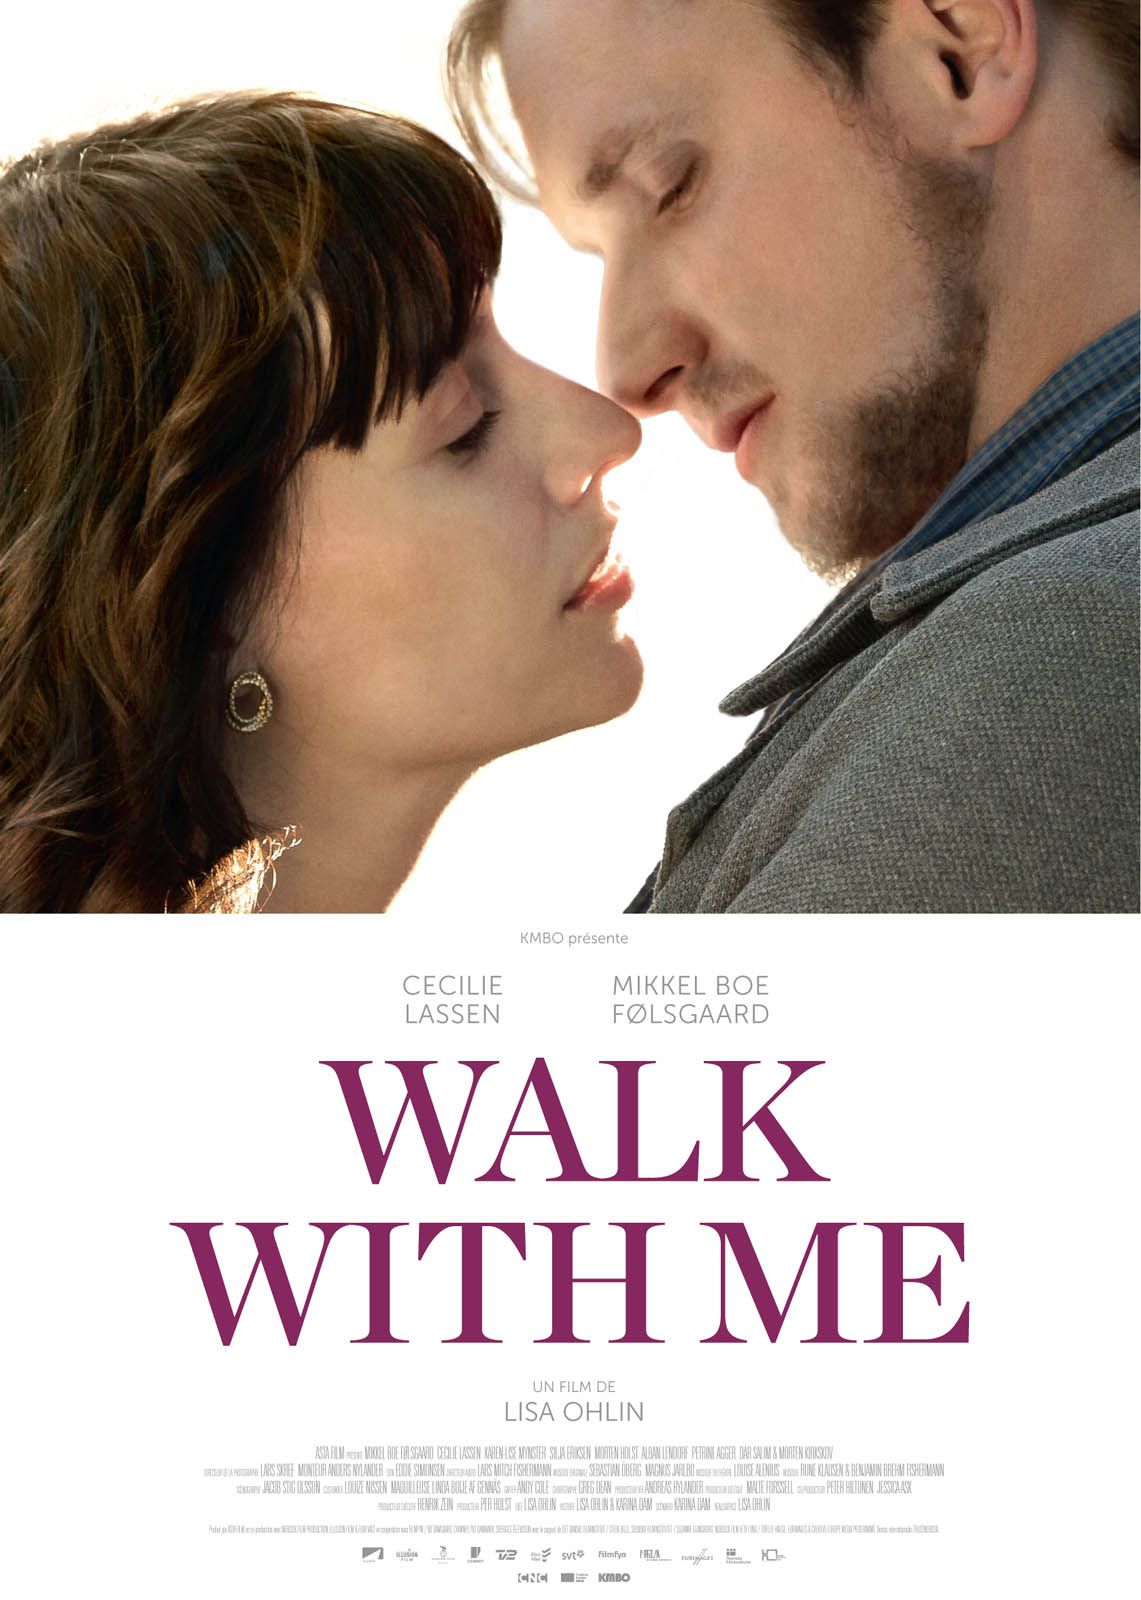 Walk with Me - Film (2016) streaming VF gratuit complet